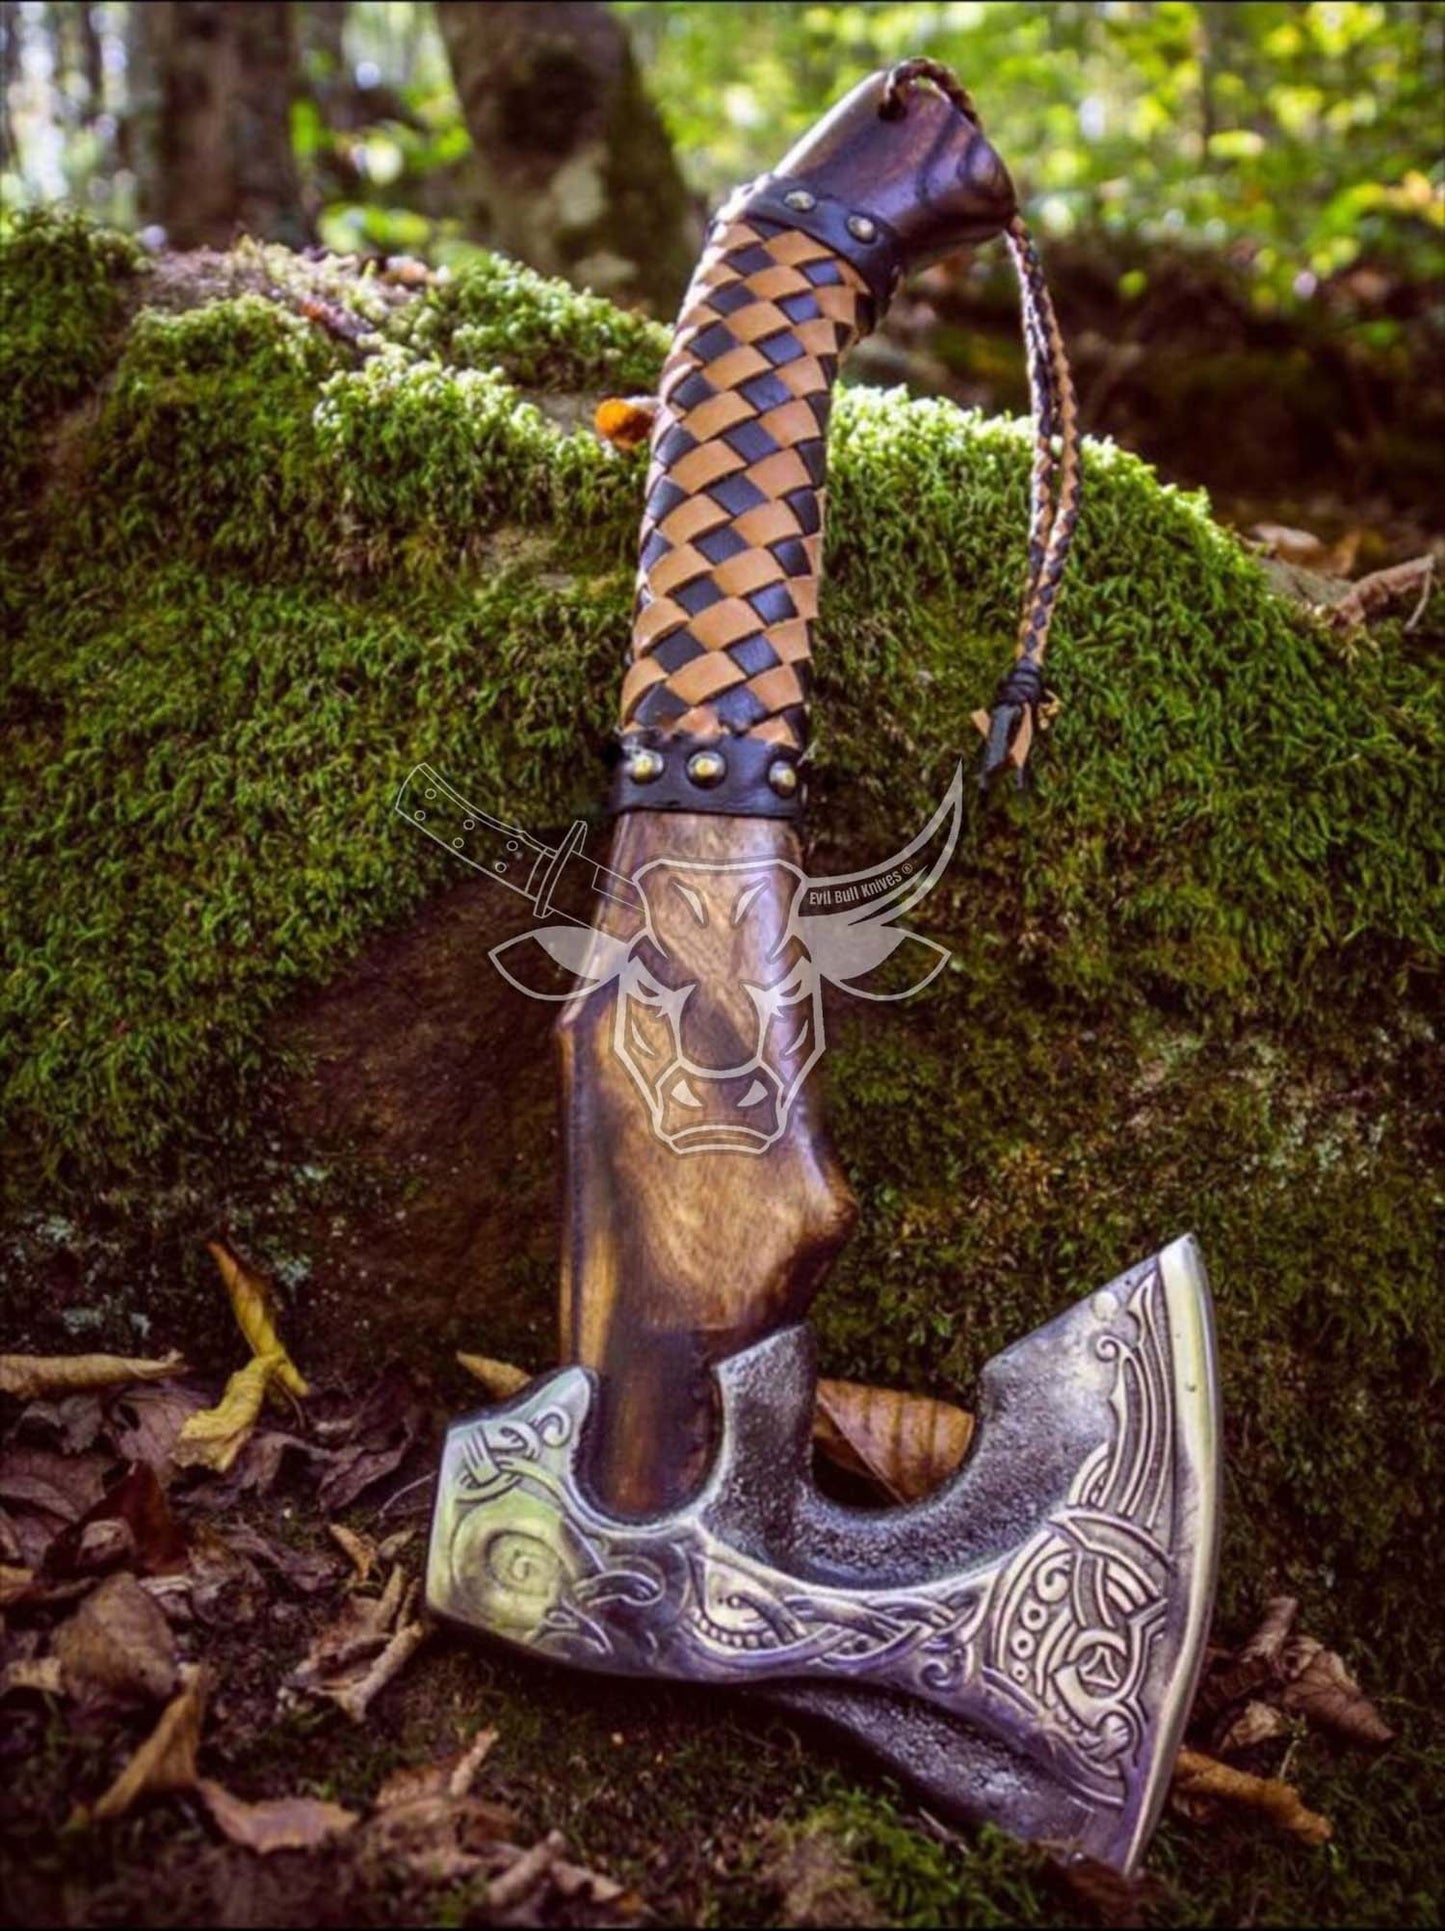 EBK-66 Axe, Custom Gift Hand Forged Carbon Steel VIKING AXE with Ash Wood Shaft, Wedding Gift, , Christmas Gift For Him